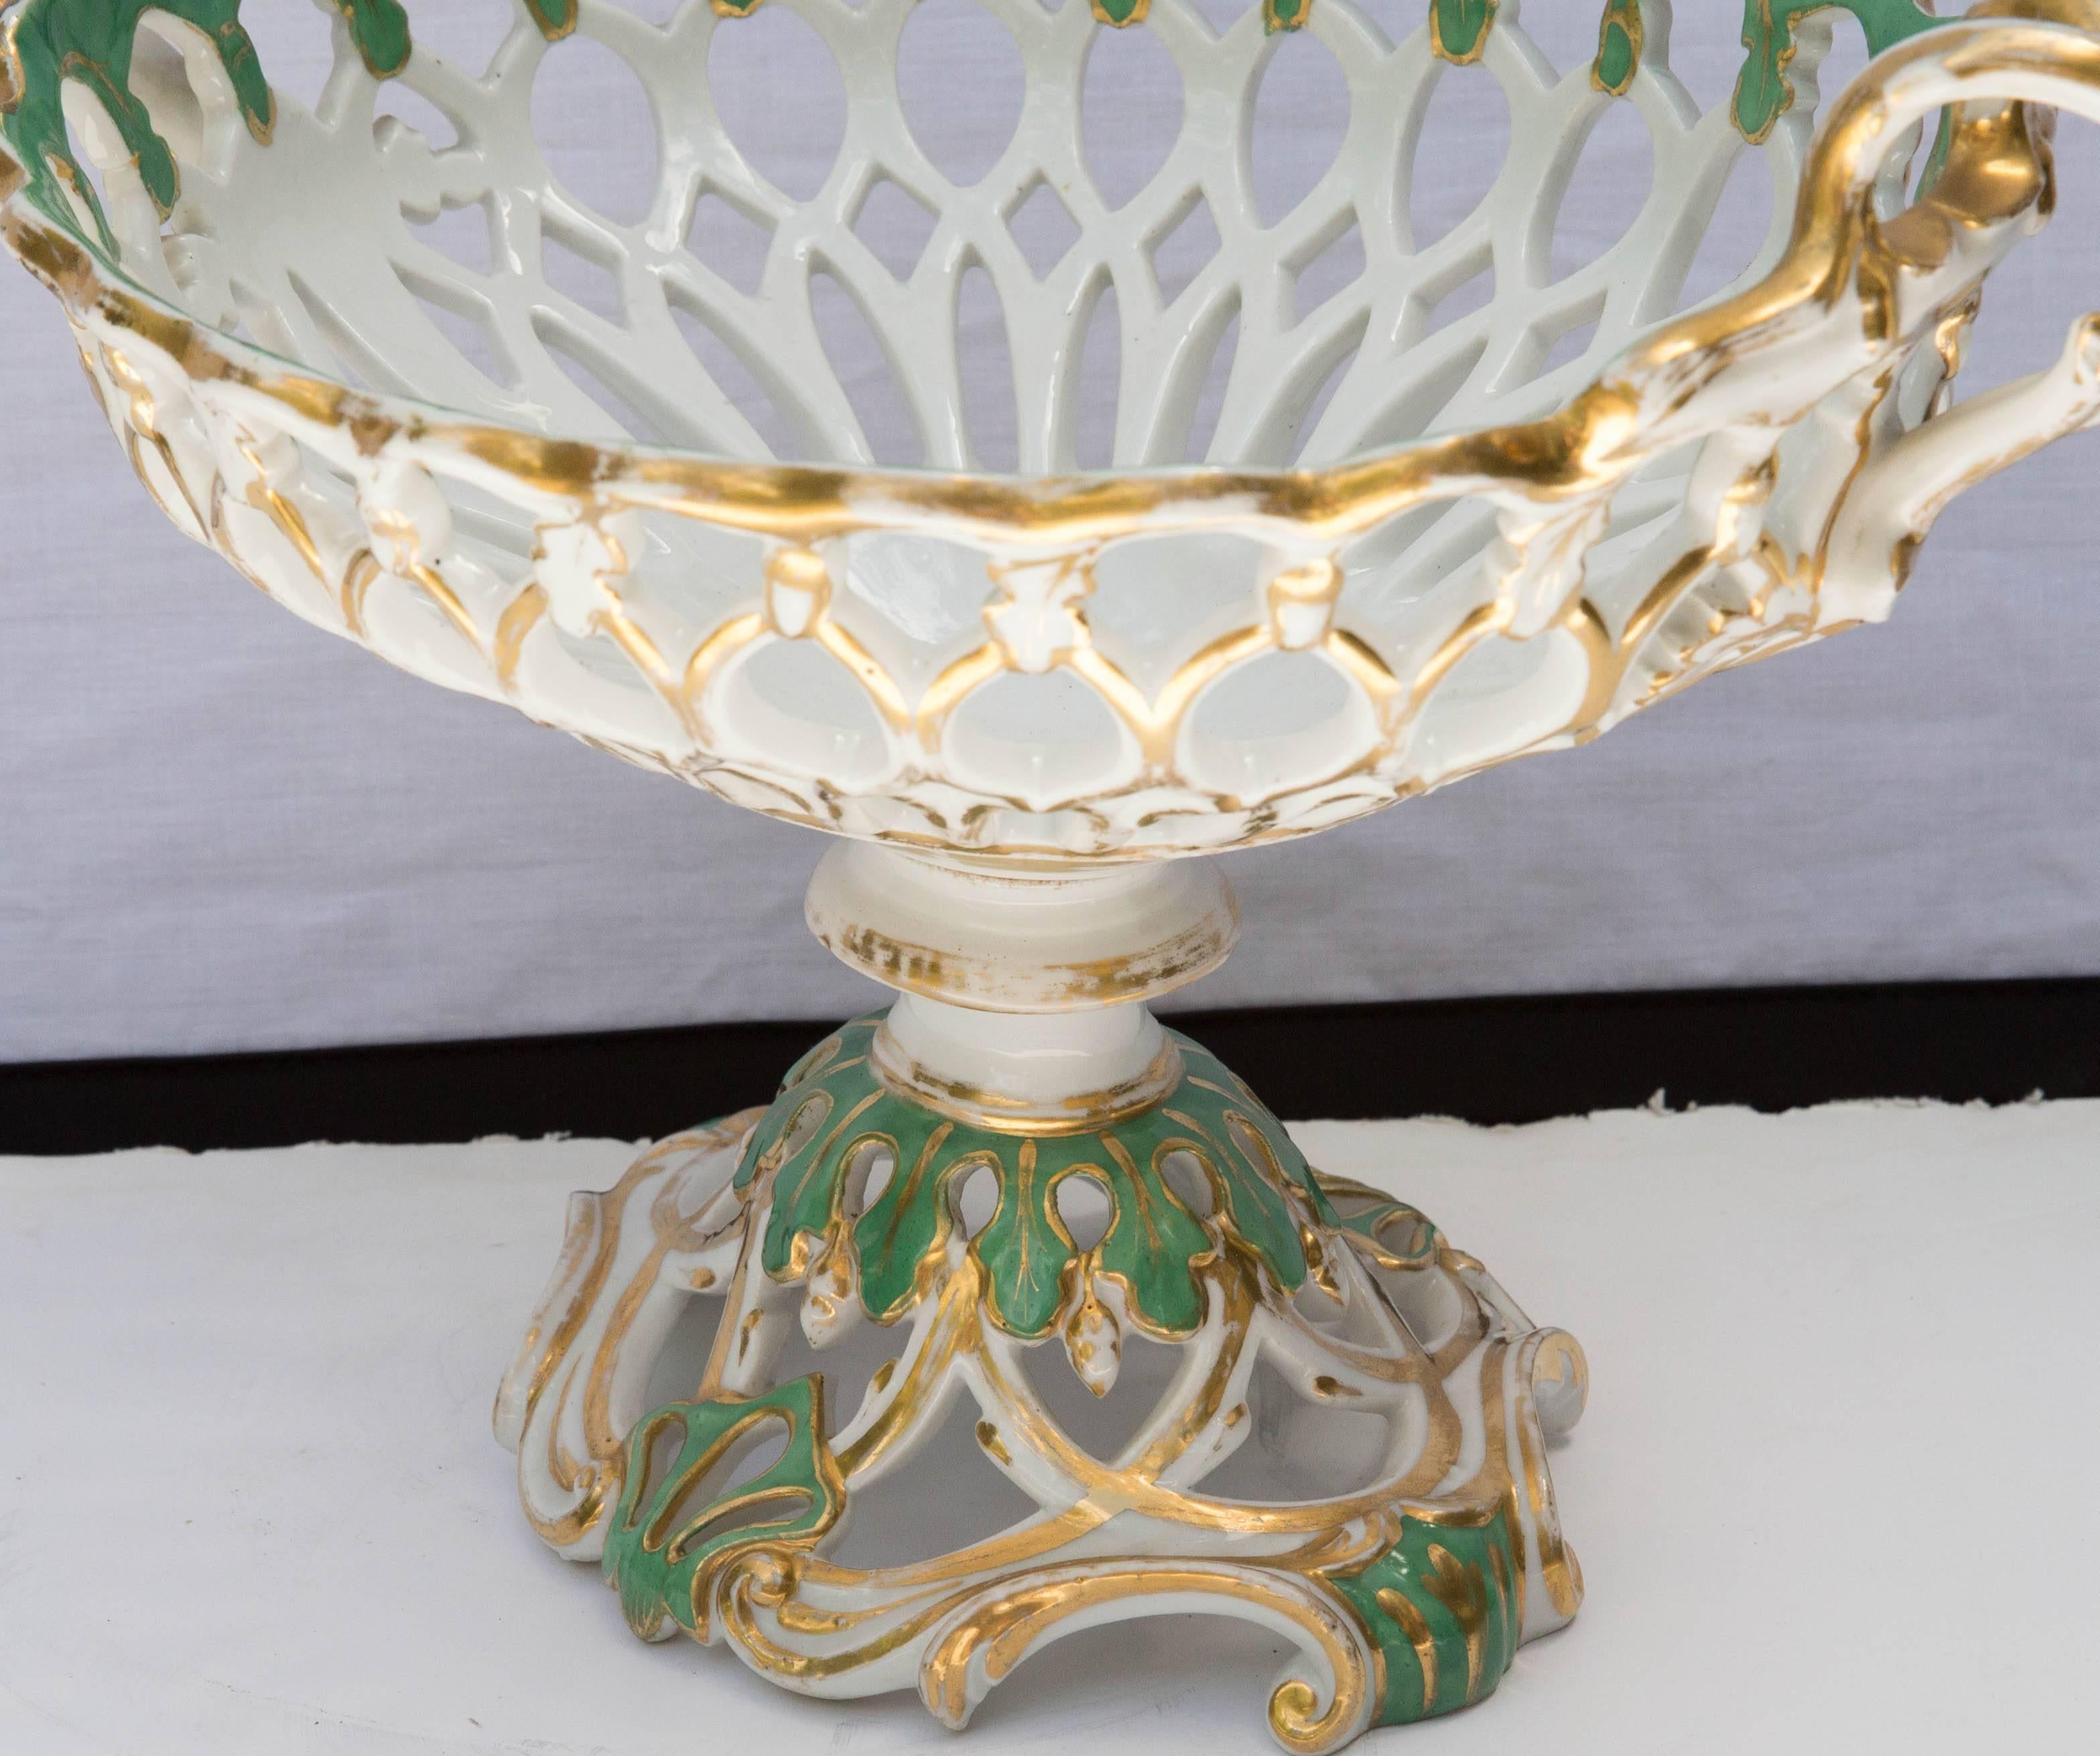 Napoleon III Old Paris Porcelain Reticulated Basket Compote